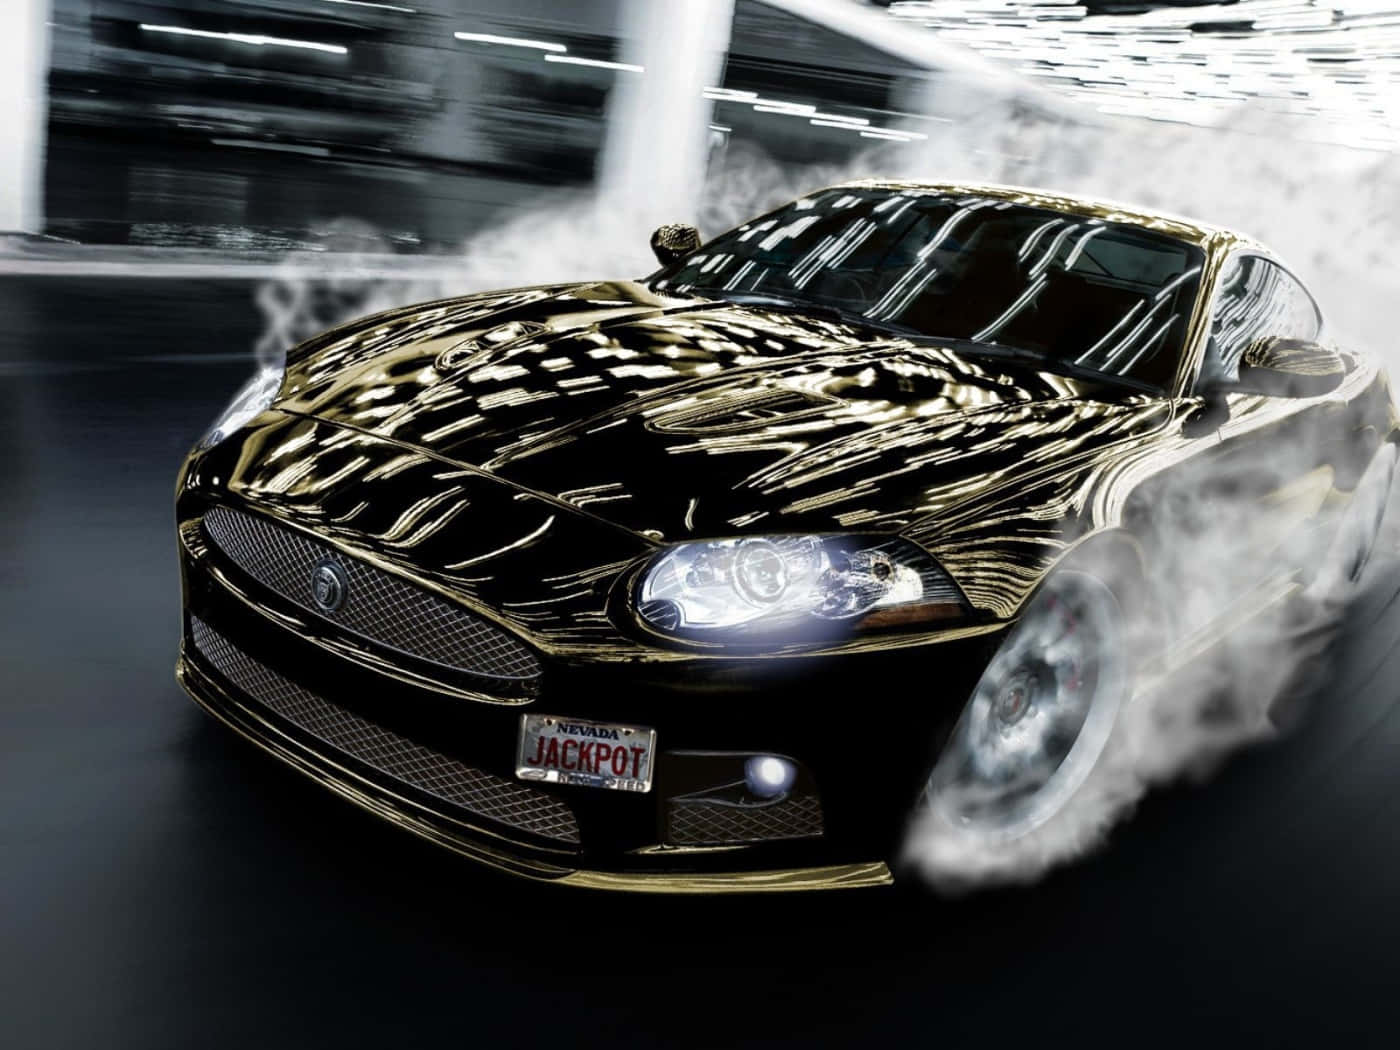 Sleek and Powerful Jaguar XKR in Action Wallpaper